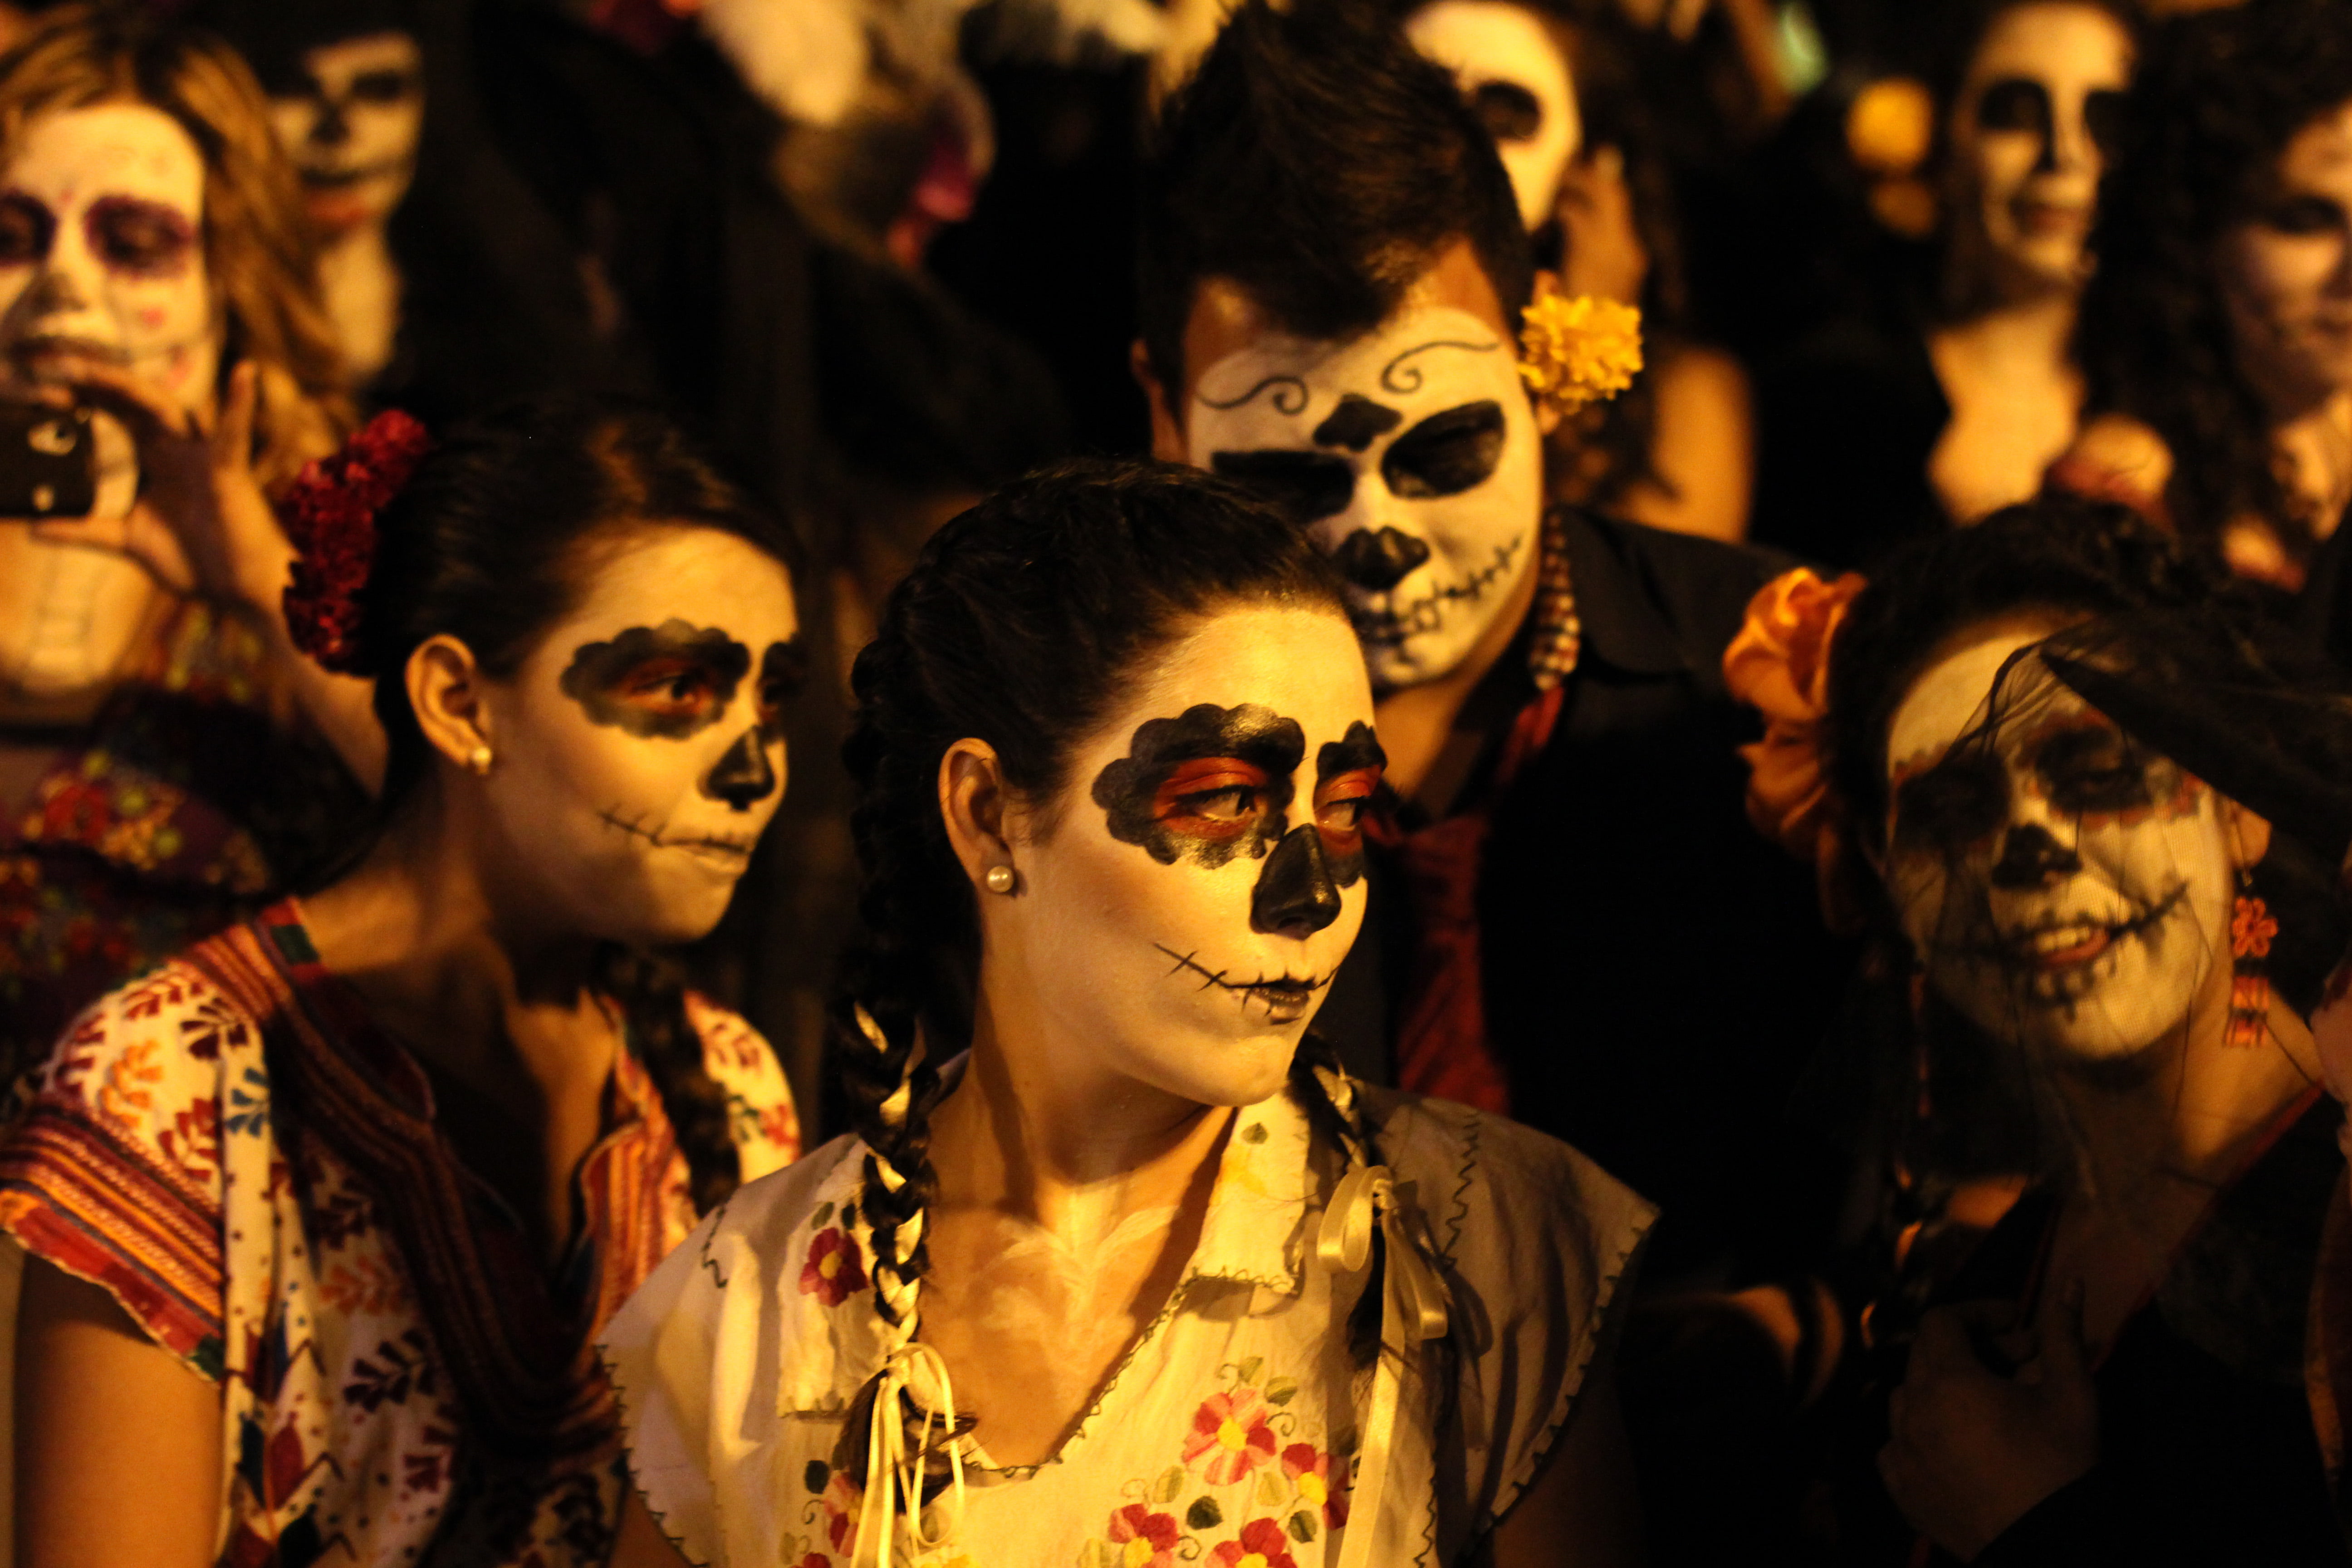 People disguised as "Catrina" during the celebration of the day of dead in Guadalajara, Mexico on November 02, 2012. La catrina is the Mexican representation of death and this year celebrates 100 years of having been created by the Mexican artist Jose Guadalupe Posada. AFP PHOTO/Hector Guerrero (Photo credit should read HECTOR GUERRERO/AFP/Getty Images)